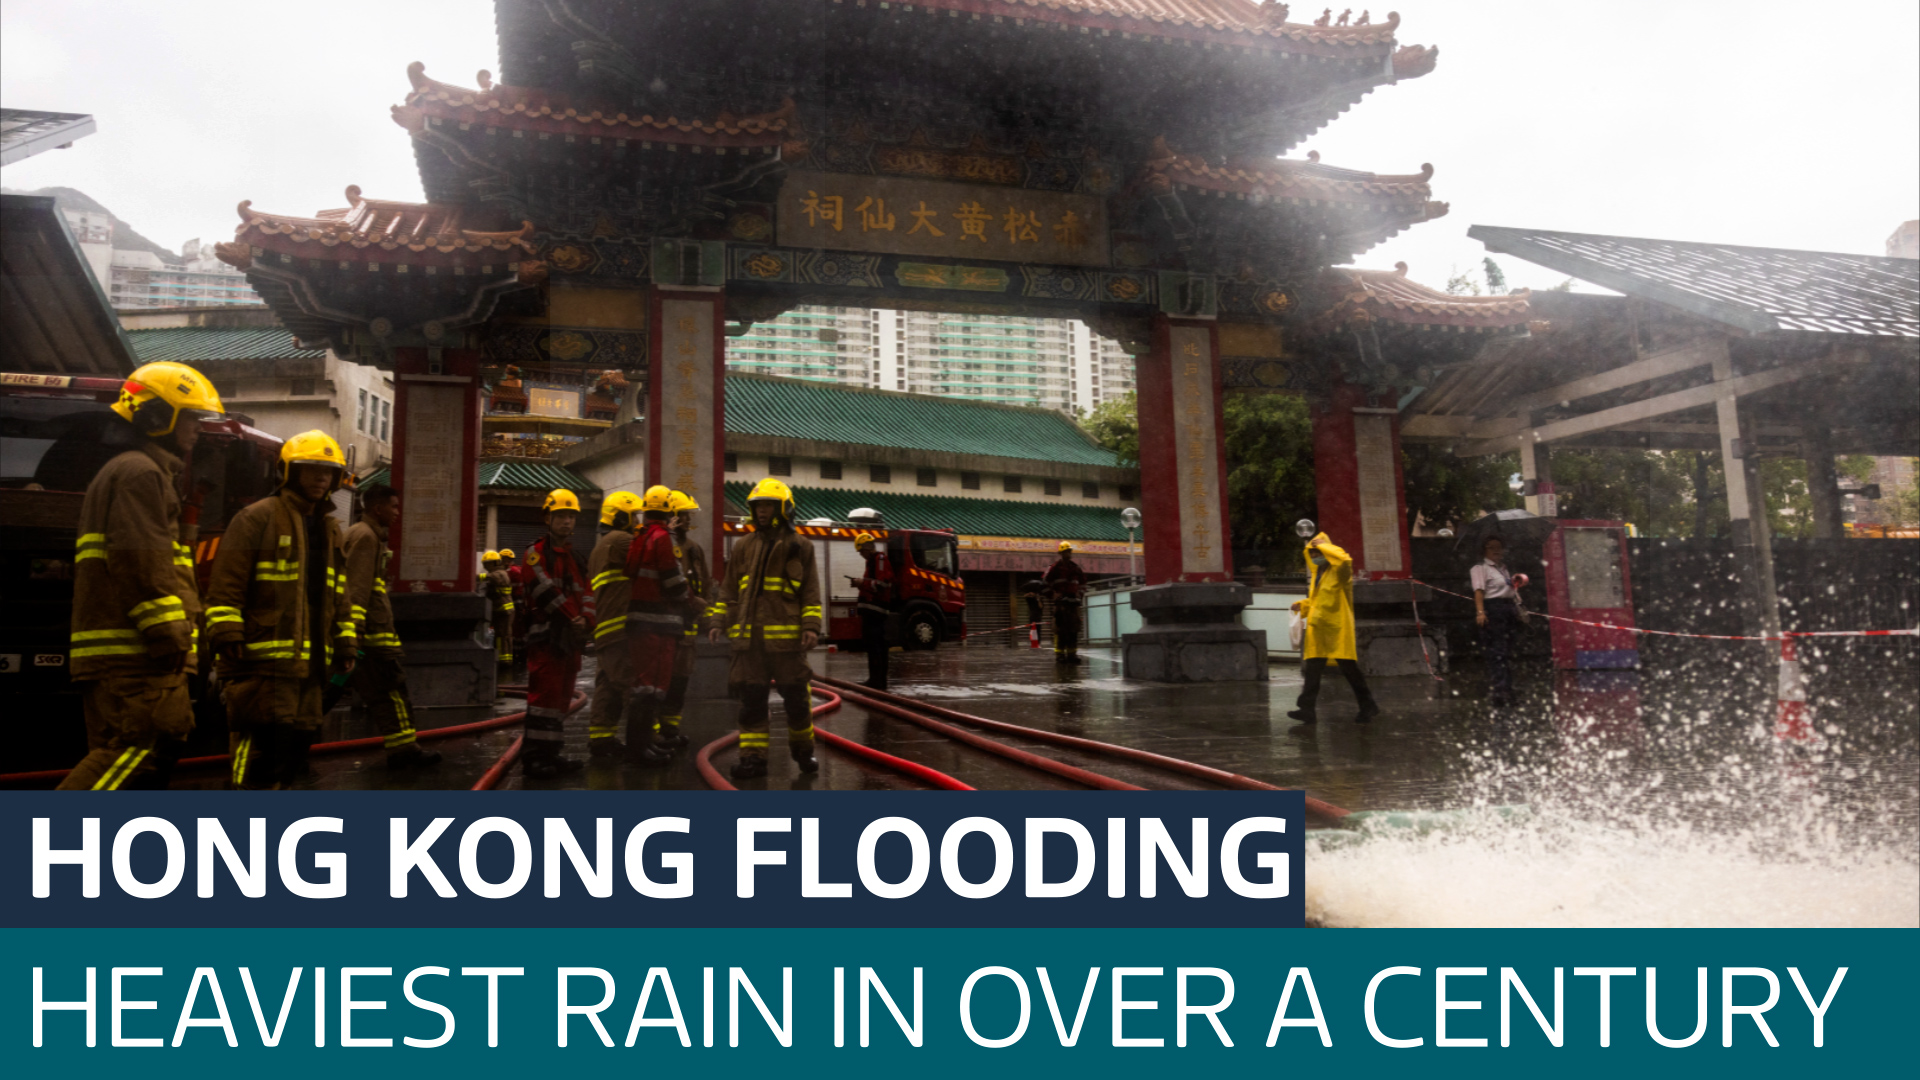 Chaos in Hong Kong as heavy rain shuts down the city - Latest From ITV News